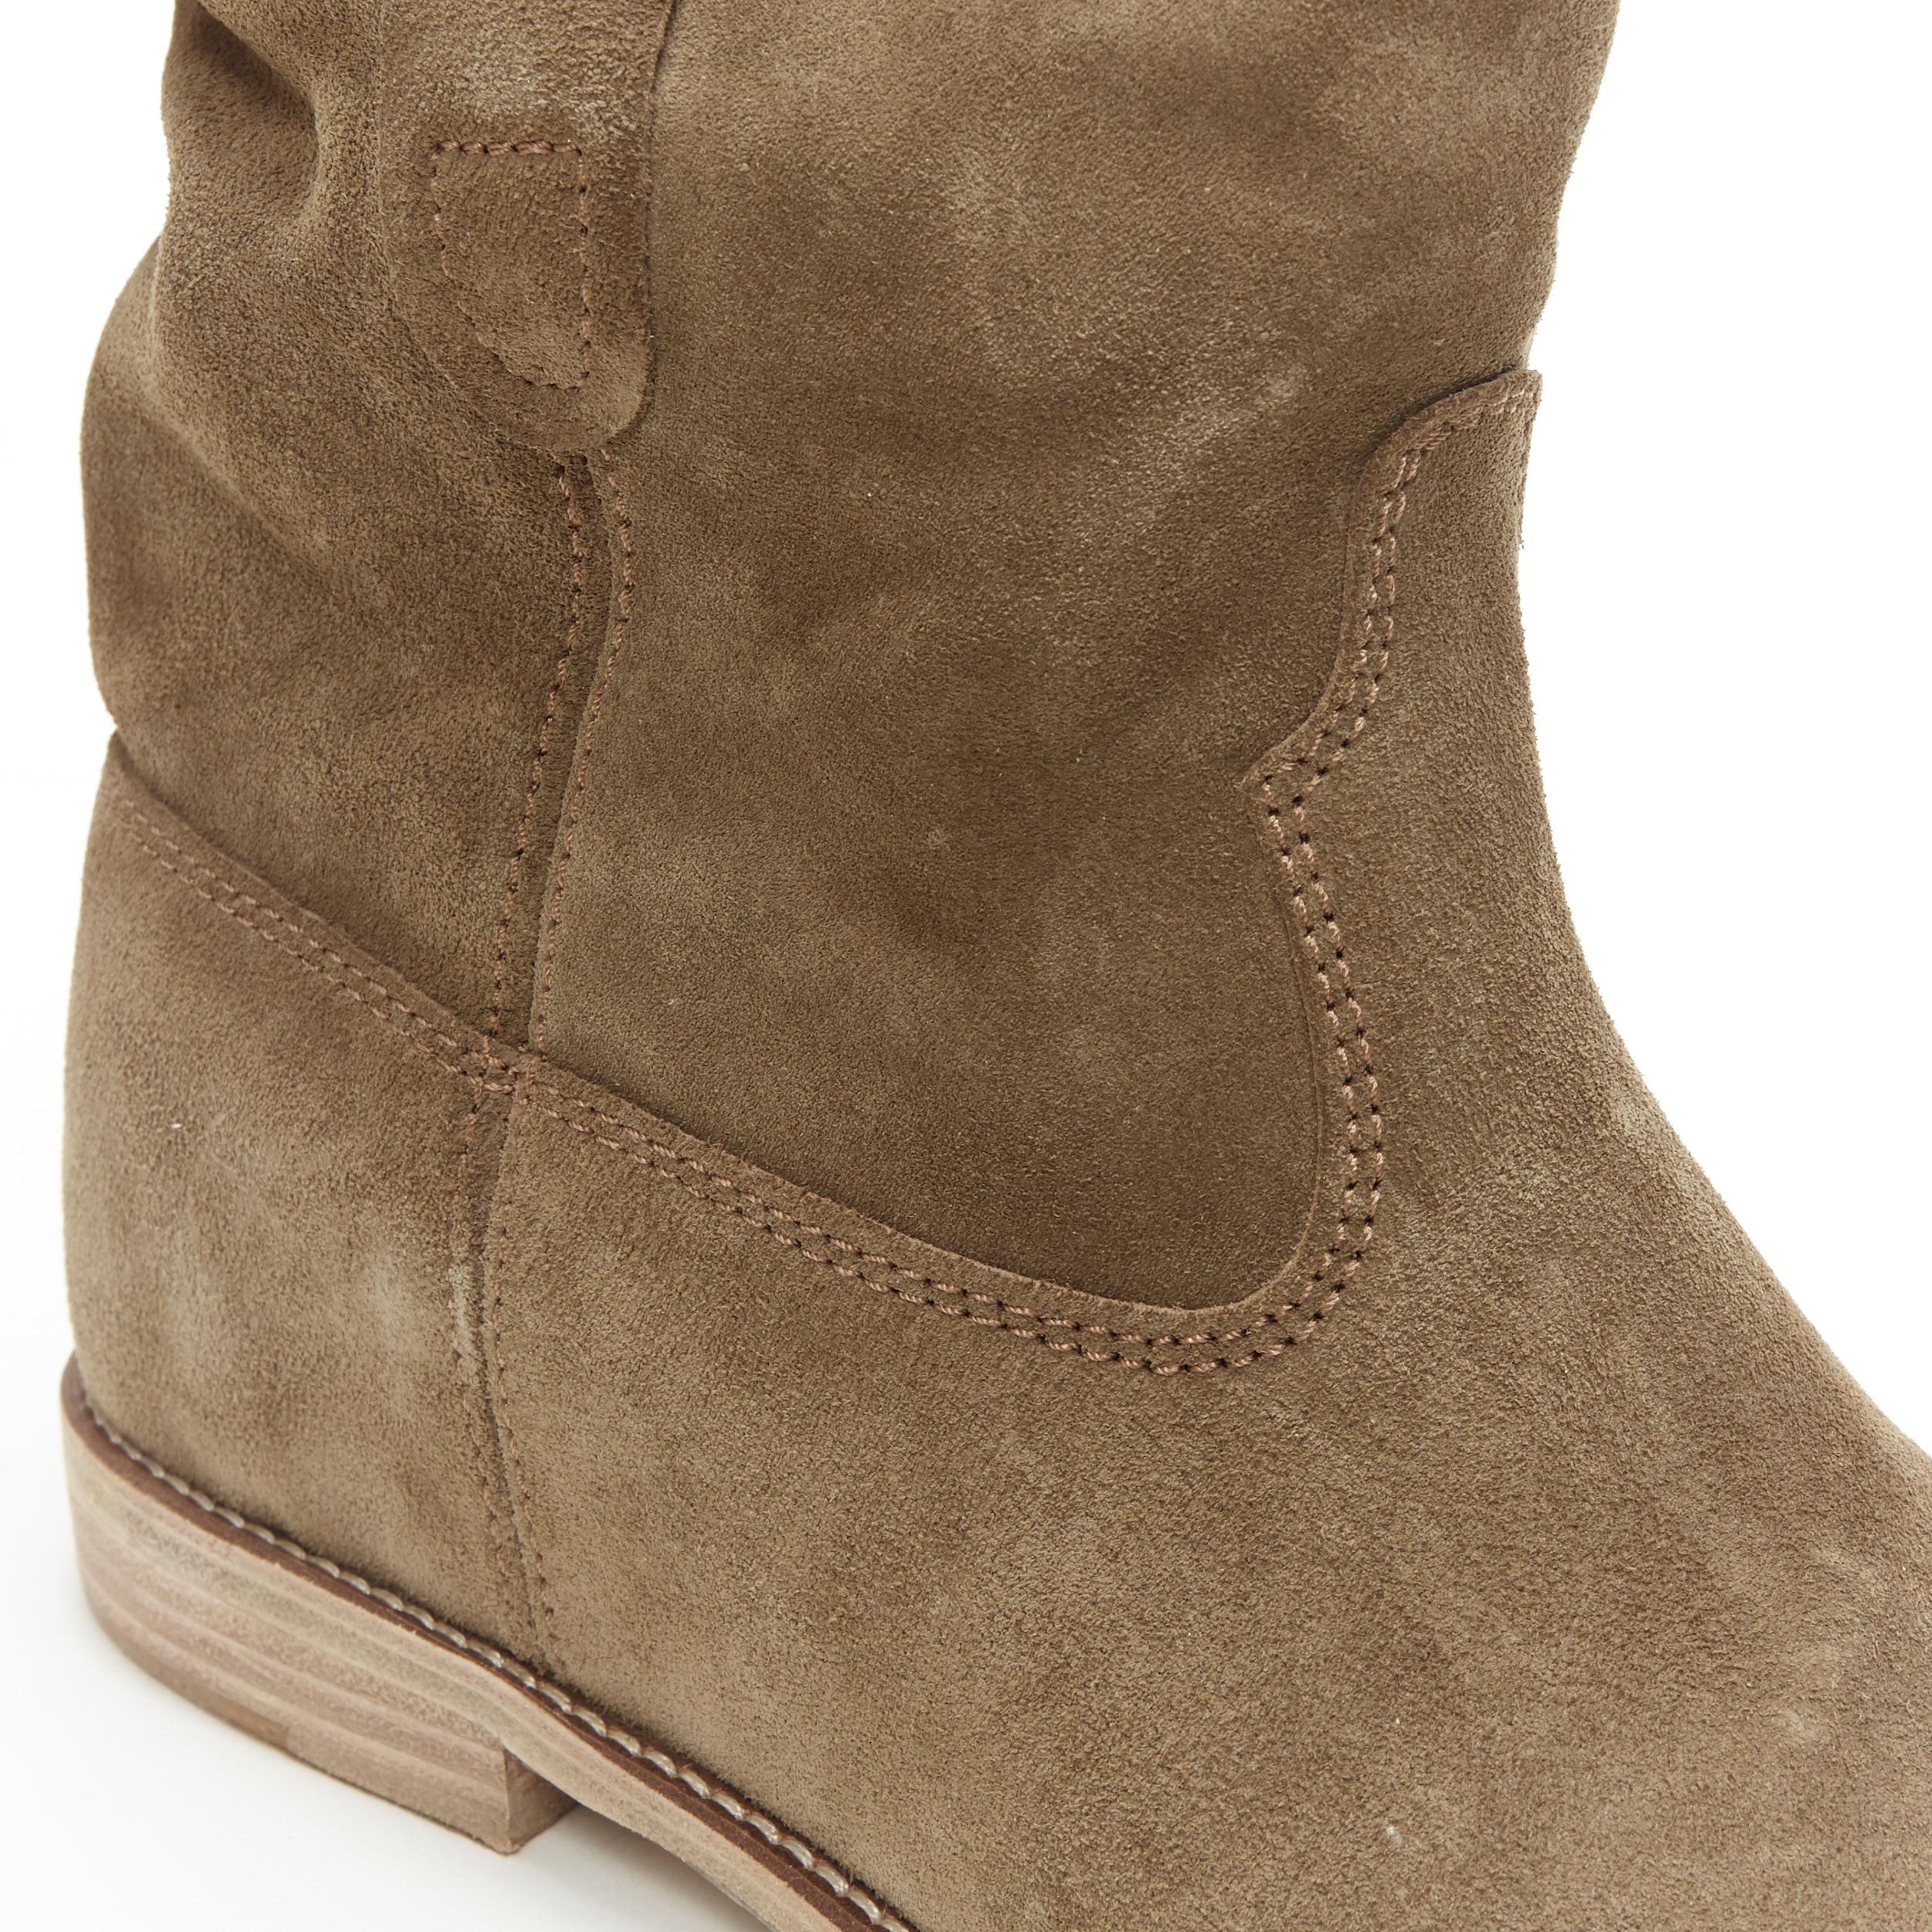 new ISABEL MARANT Crisi Taupe Olive suede concealed wedge western boots EU40 4